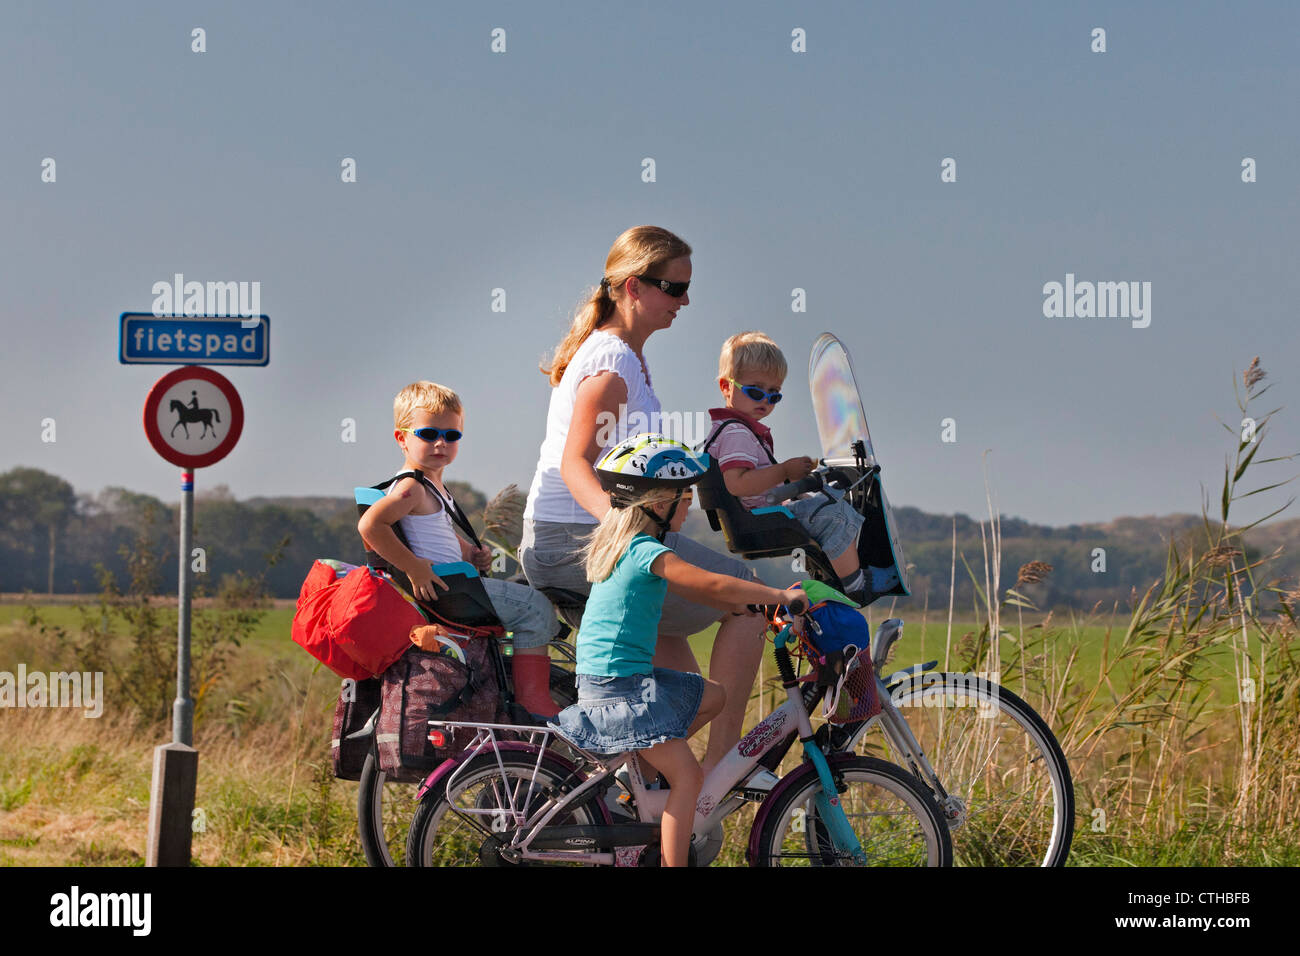 The Netherlands, West Kapelle, Woman and children on bicycle. Stock Photo